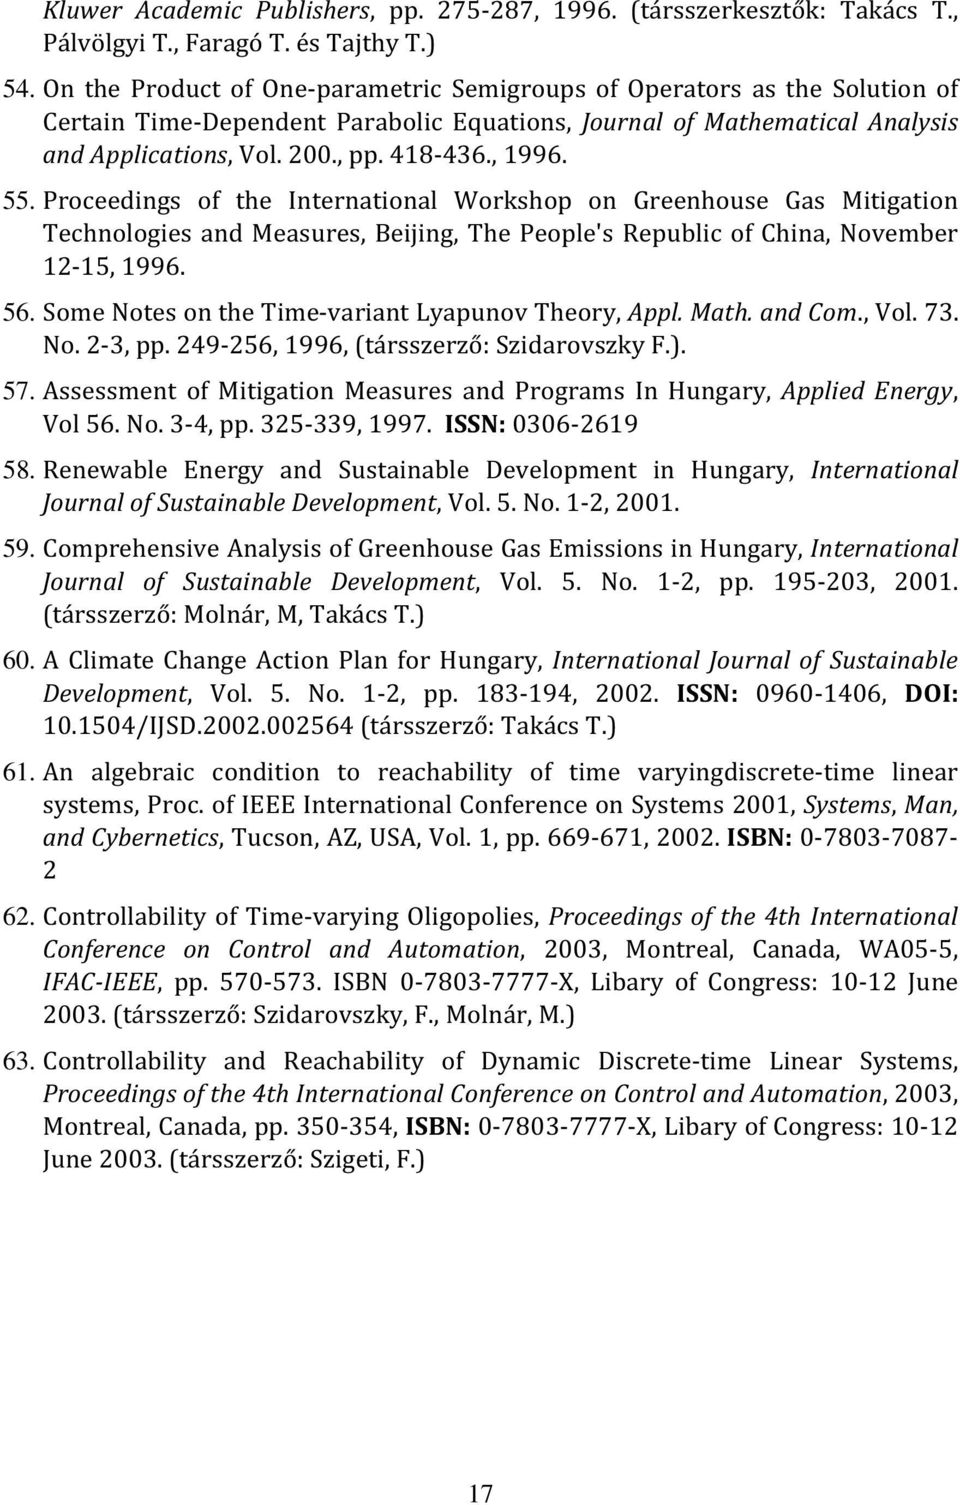 , 1996. 55. Proceedings of the International Workshop on Greenhouse Gas Mitigation Technologies and Measures, Beijing, The People's Republic of China, November 12-15, 1996. 56.